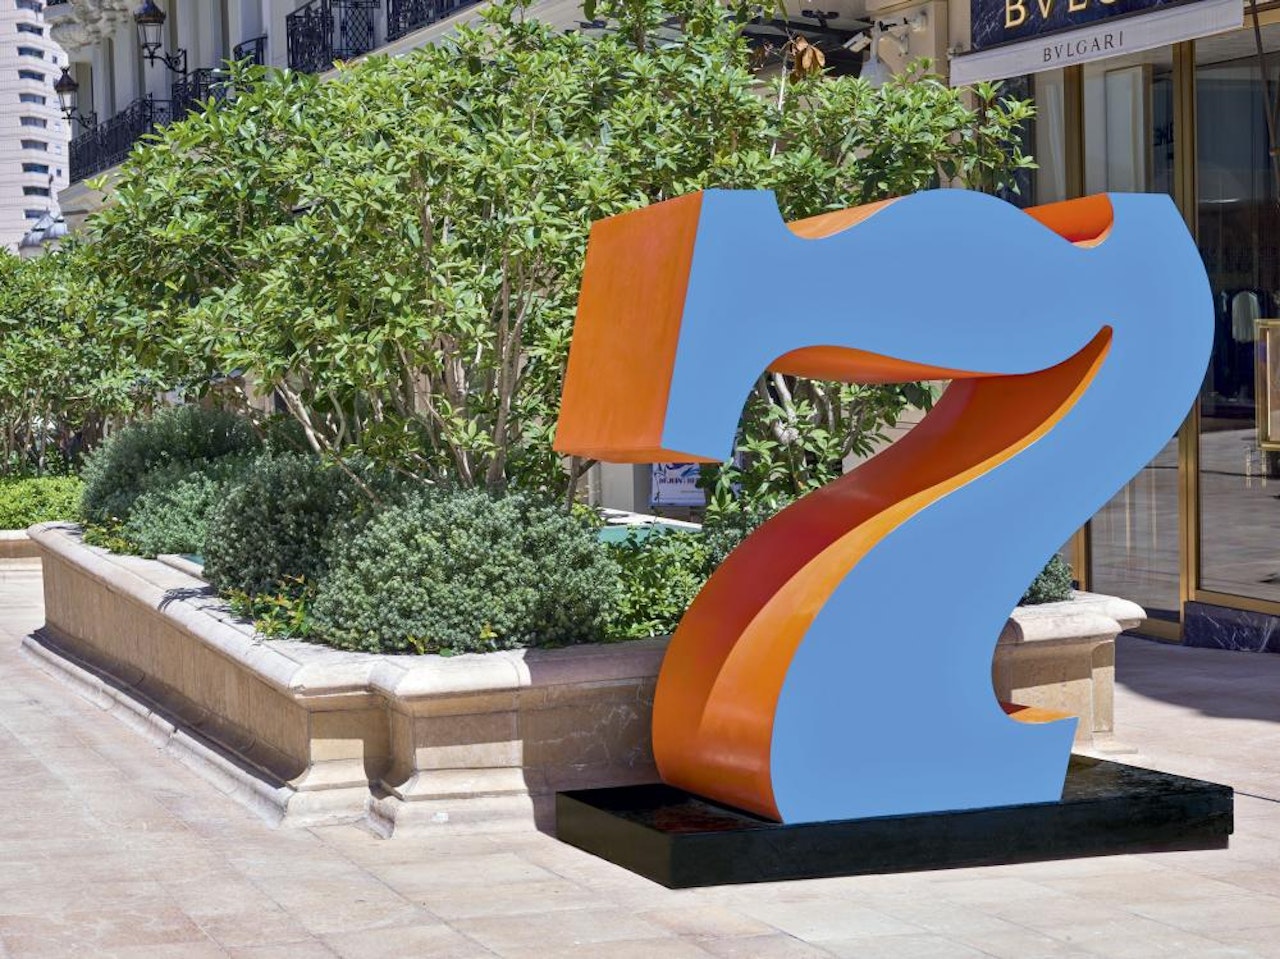 Seven by Robert Indiana